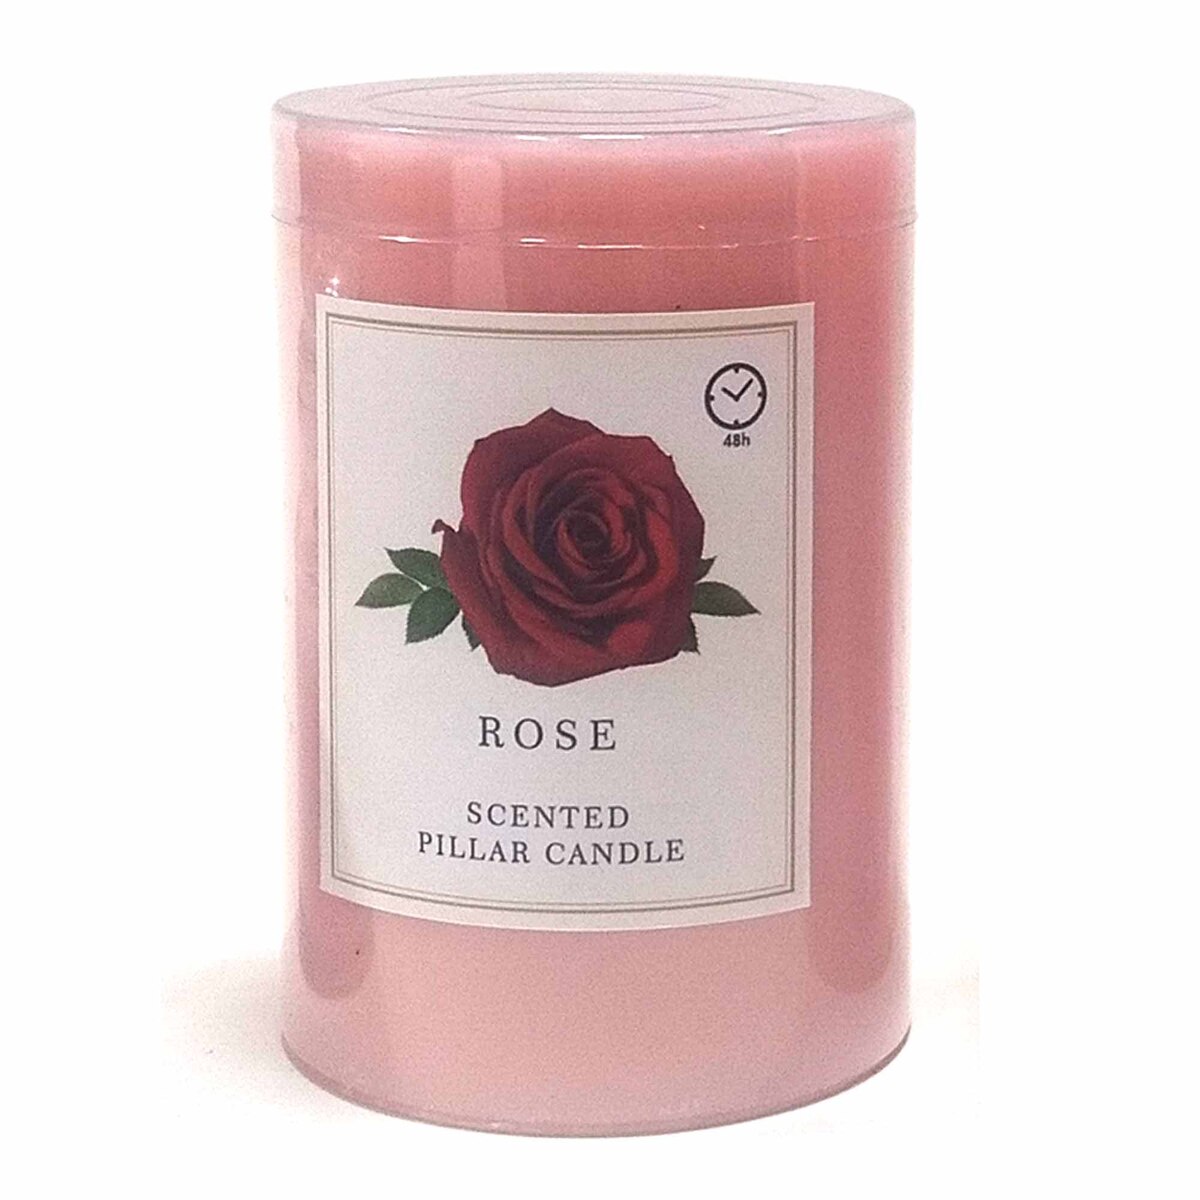 Maple Leaf Scented Pillar Candle 7.5x10cm Pink Rose